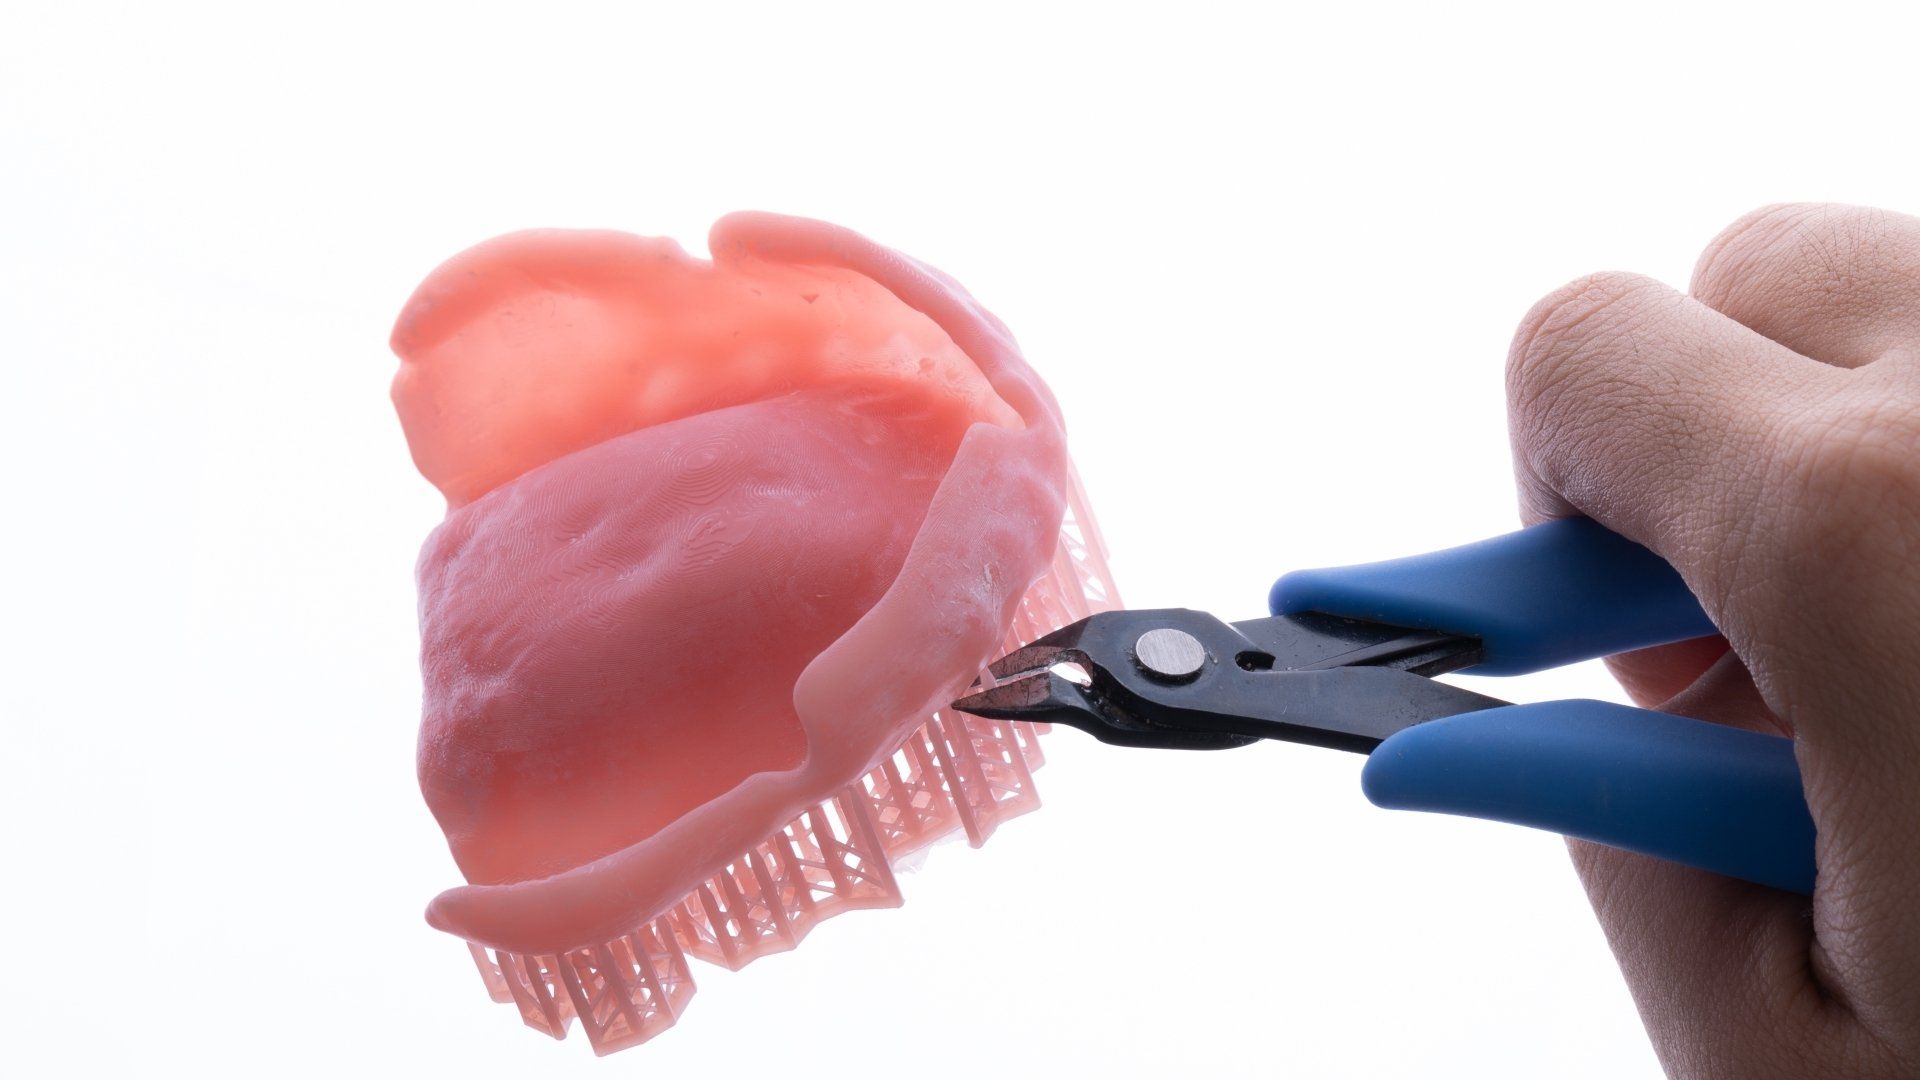 A person is holding a pair of pliers over a denture.